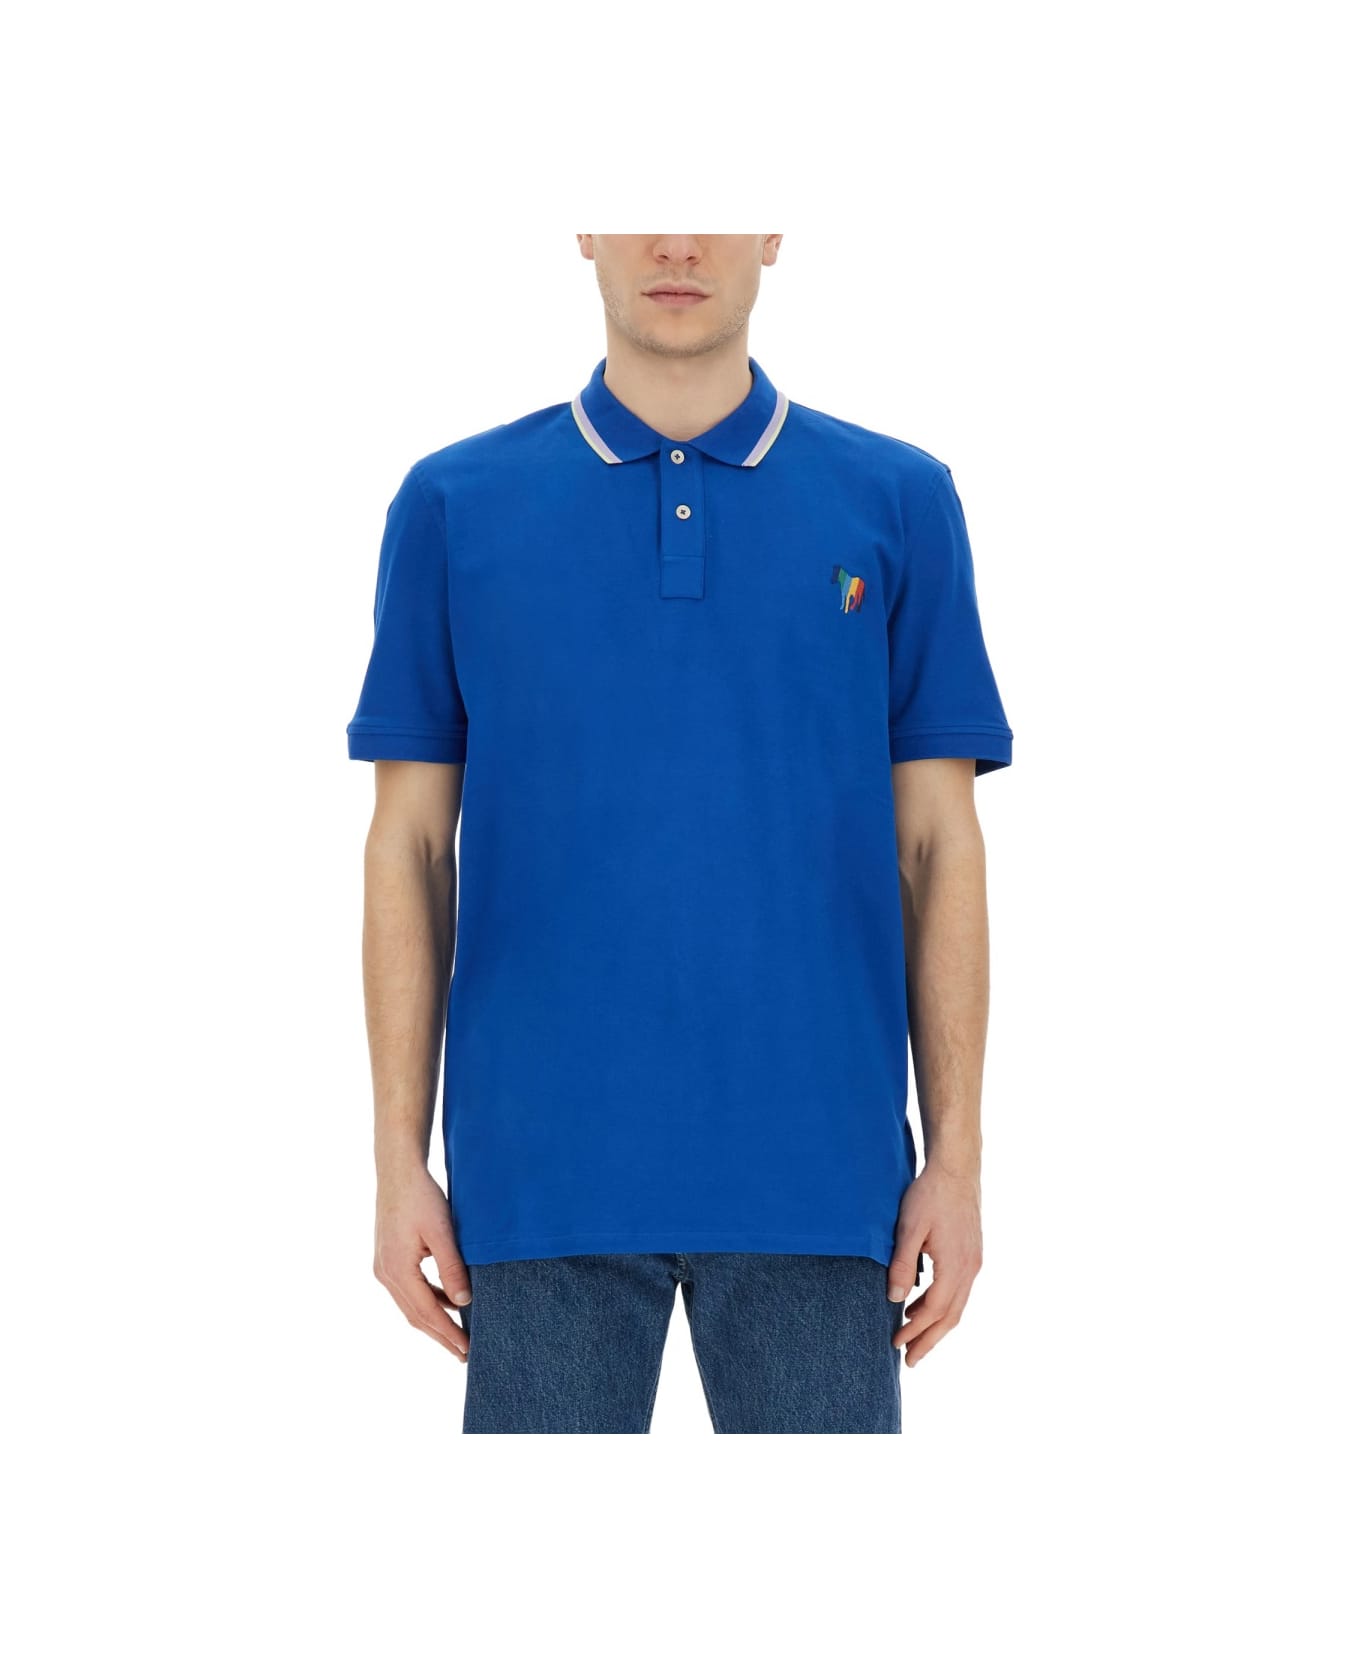 PS by Paul Smith "zebra" Polo. - BLUE ポロシャツ